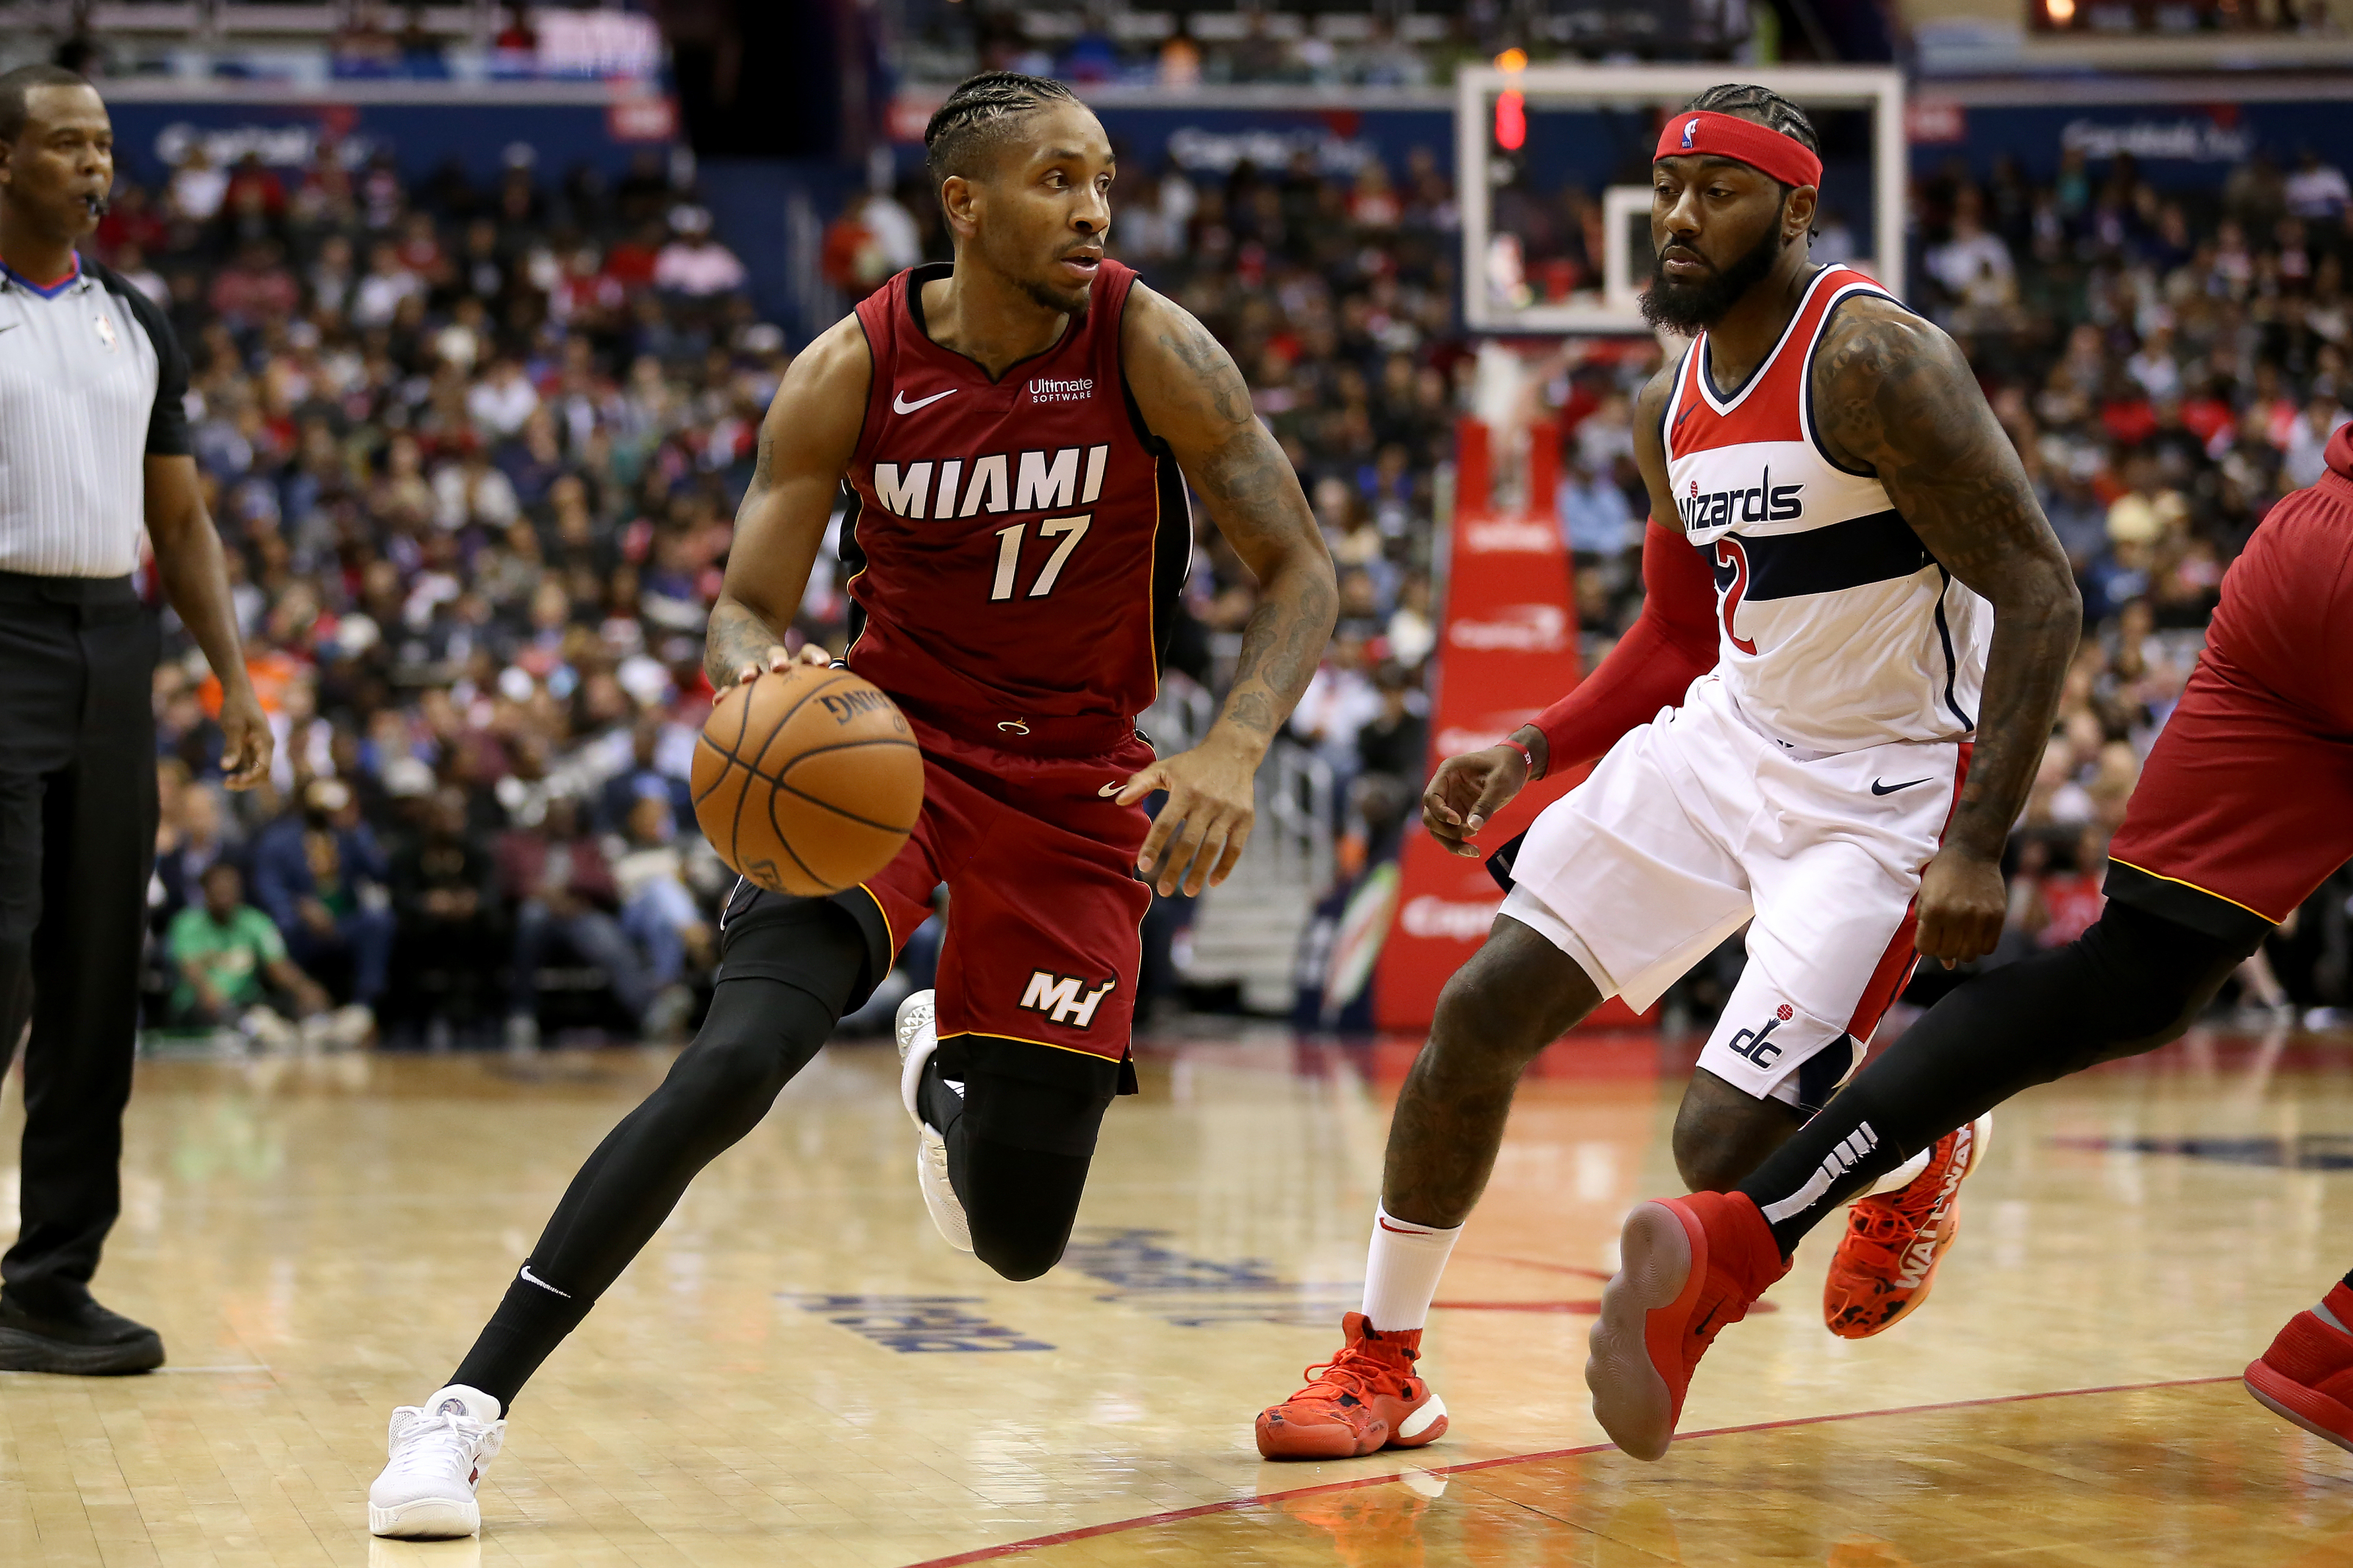 Miami Heat: What's working so far for the 2018-19 team?